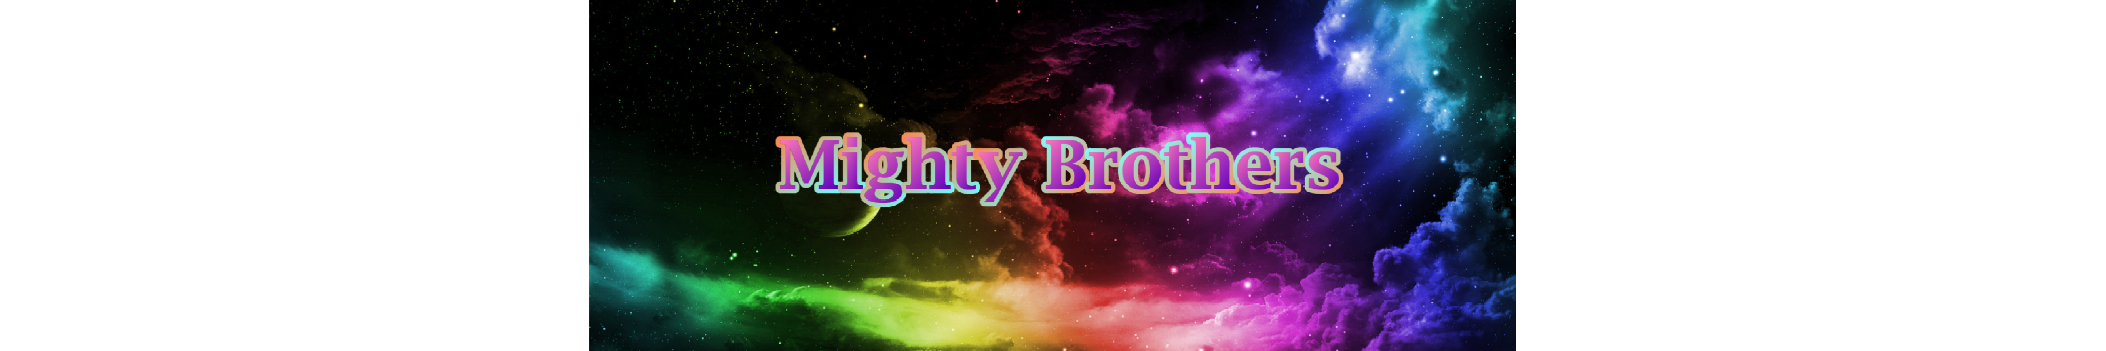 Mighty Brothers